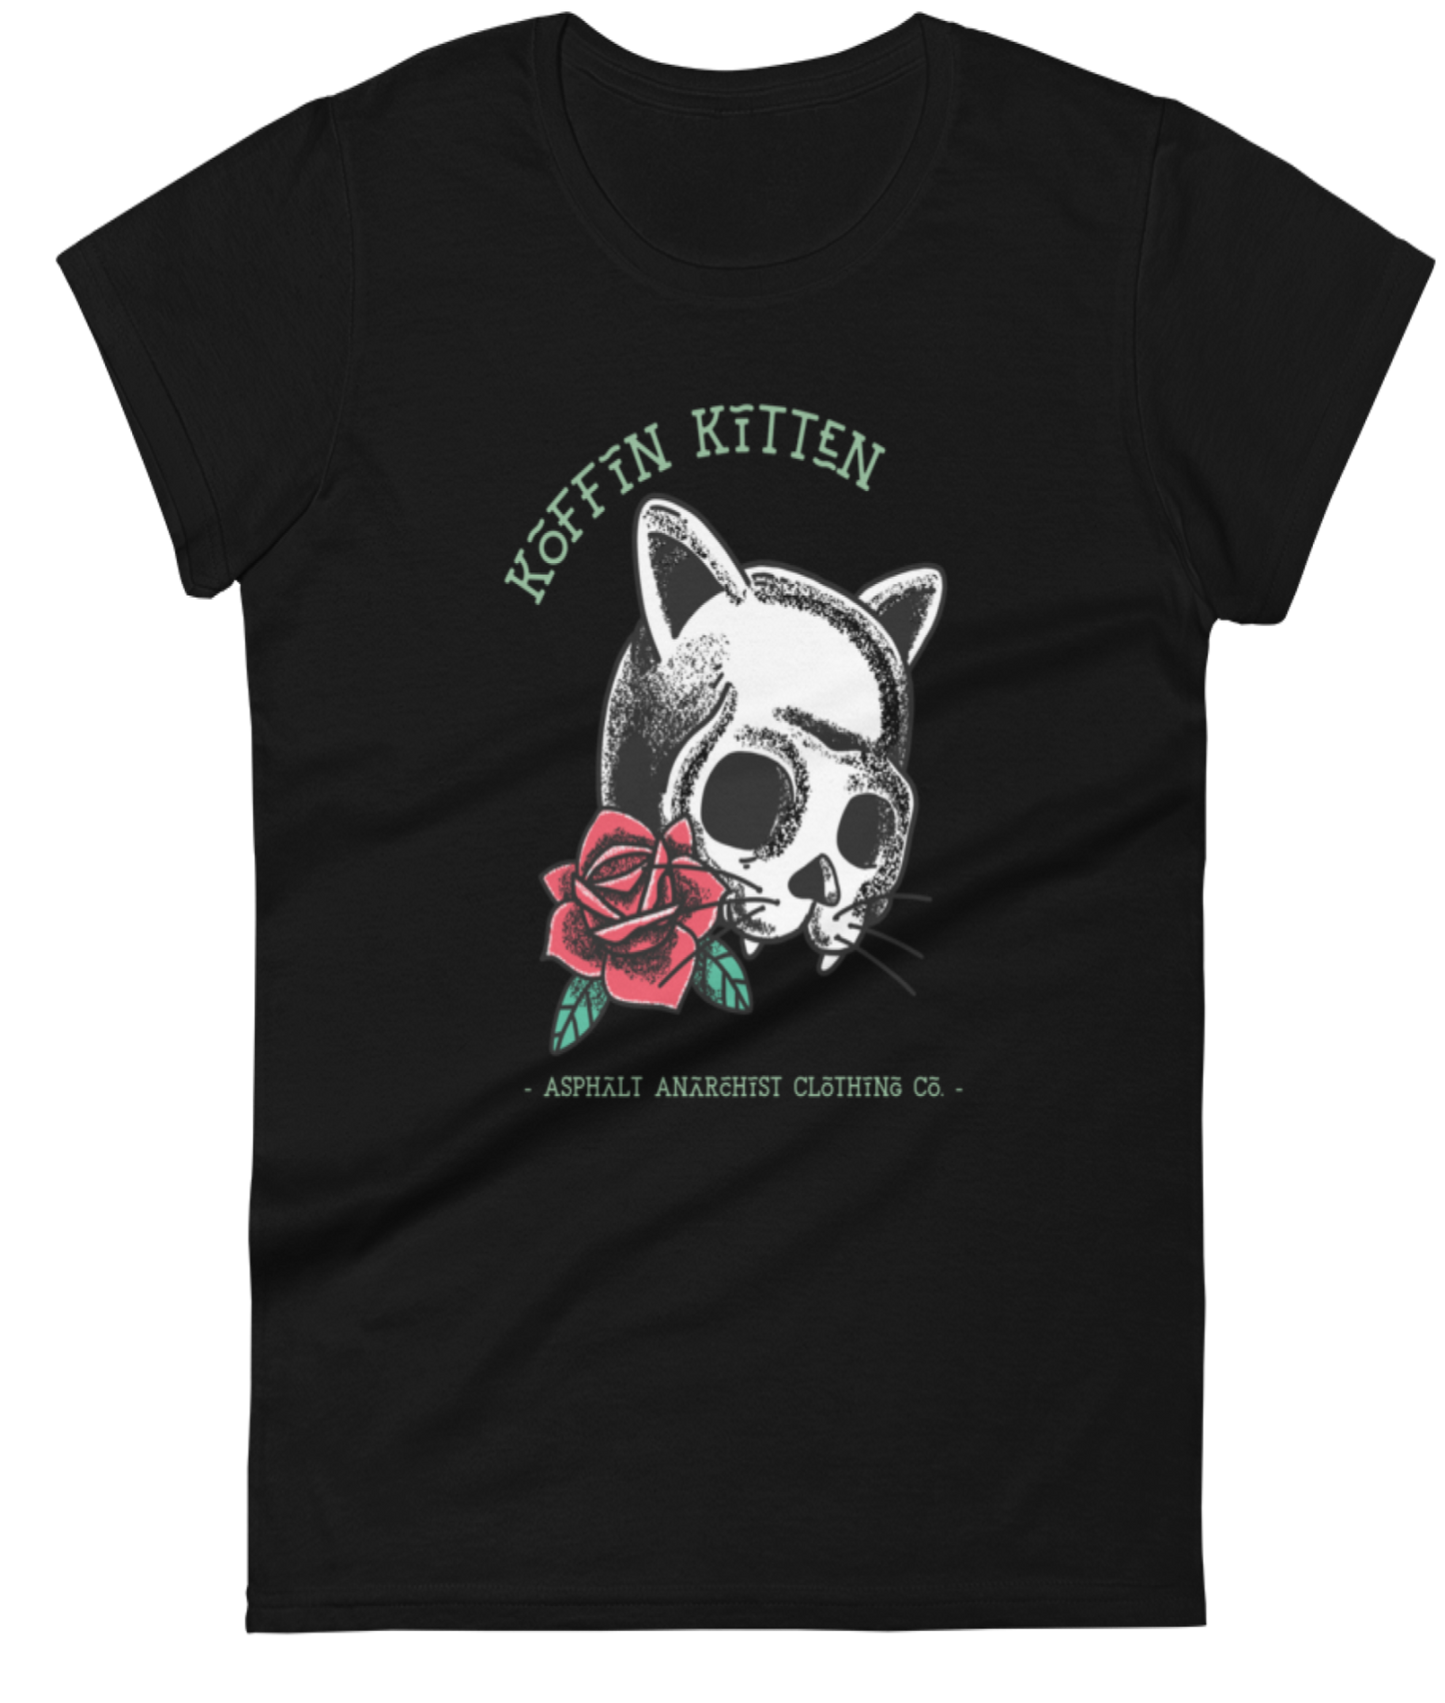 Koffin Kitten Women's Tee Rockabilly Pin Up from Asphalt Anarchist Clothing Co. HOT ROD KUSTOM KULTURE APPAREL & PRODUCTS